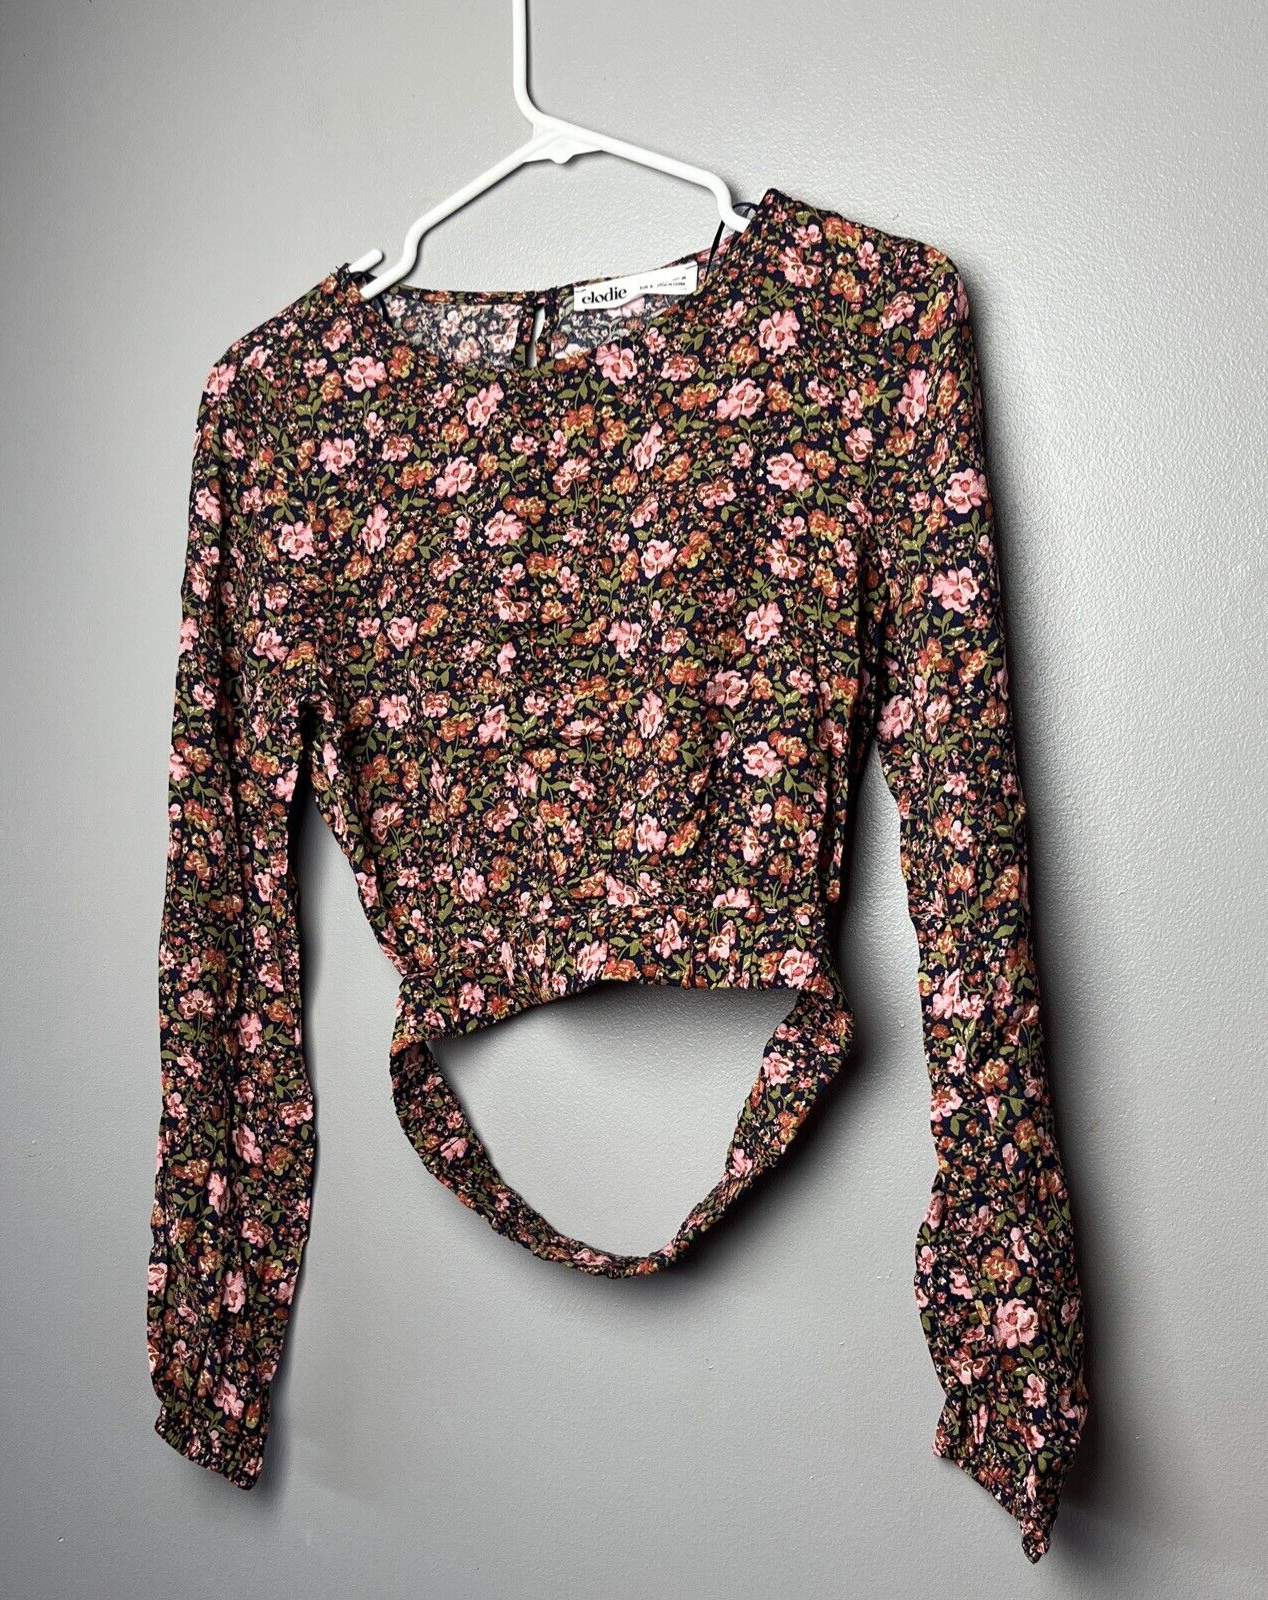 Elodie Lily Long Sleeve Top Purple Floral Open Back/ Back band Keyhole back NWT